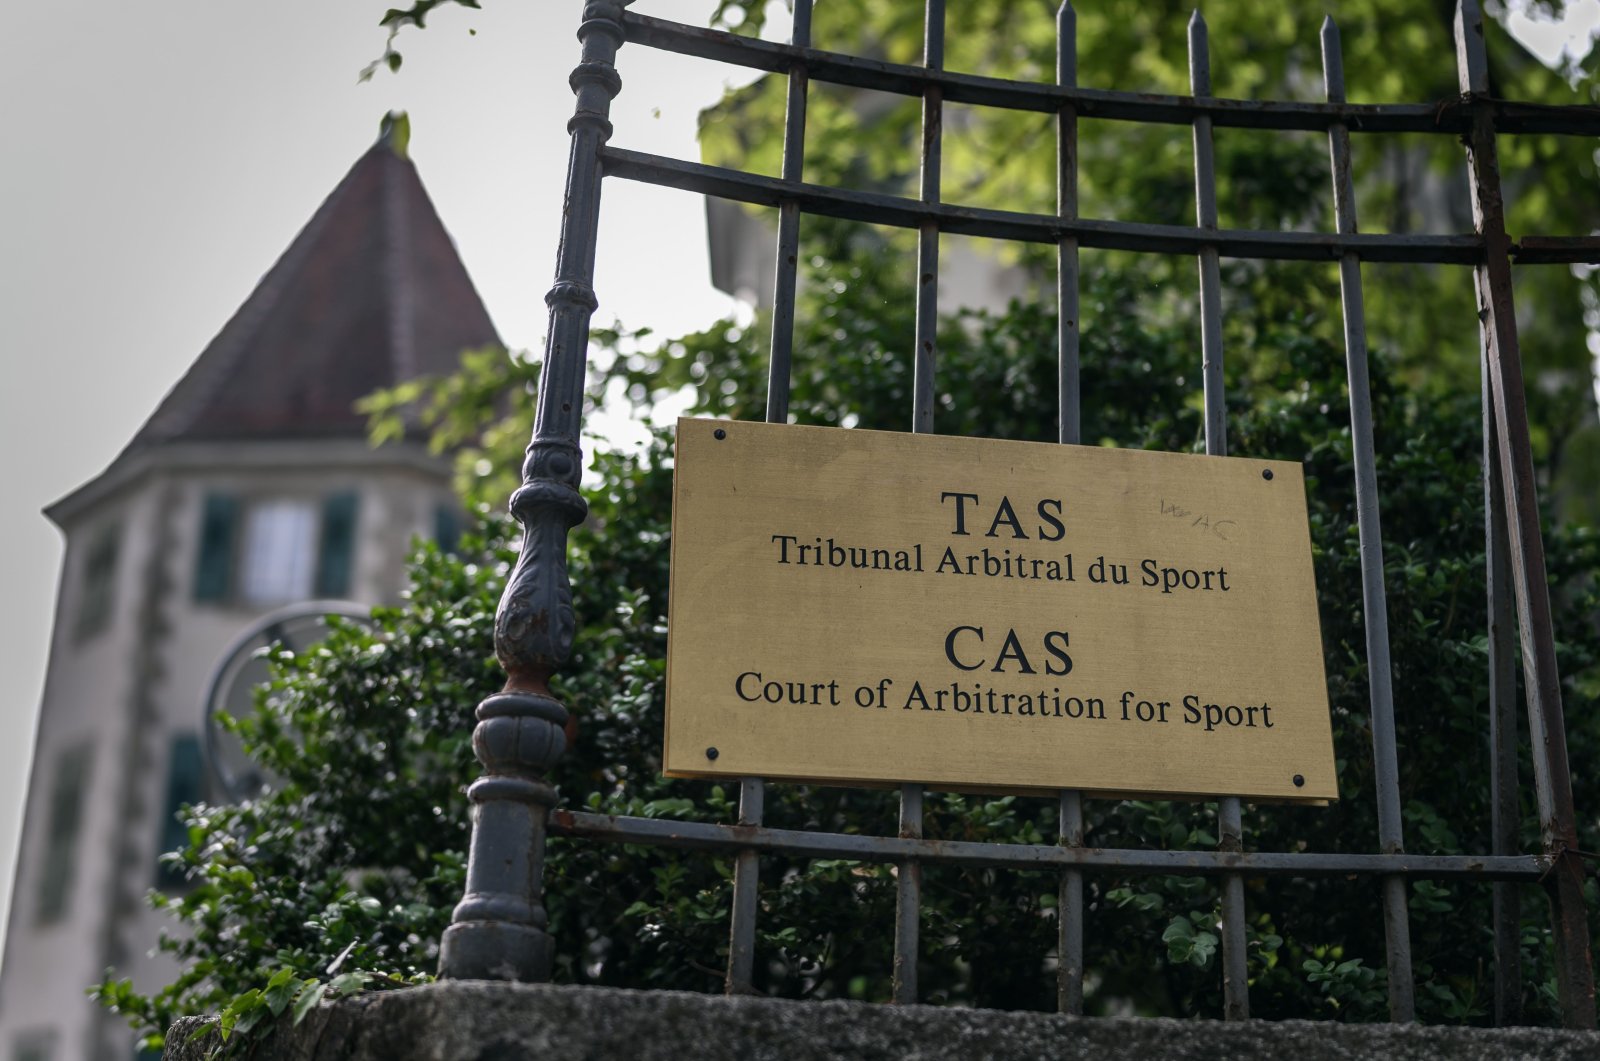 This picture taken on June 8, 2020, shows a sign at the entrance of the Court of Arbitration for Sport (CAS) in Lausanne, Switzerland. (AFP Photo)